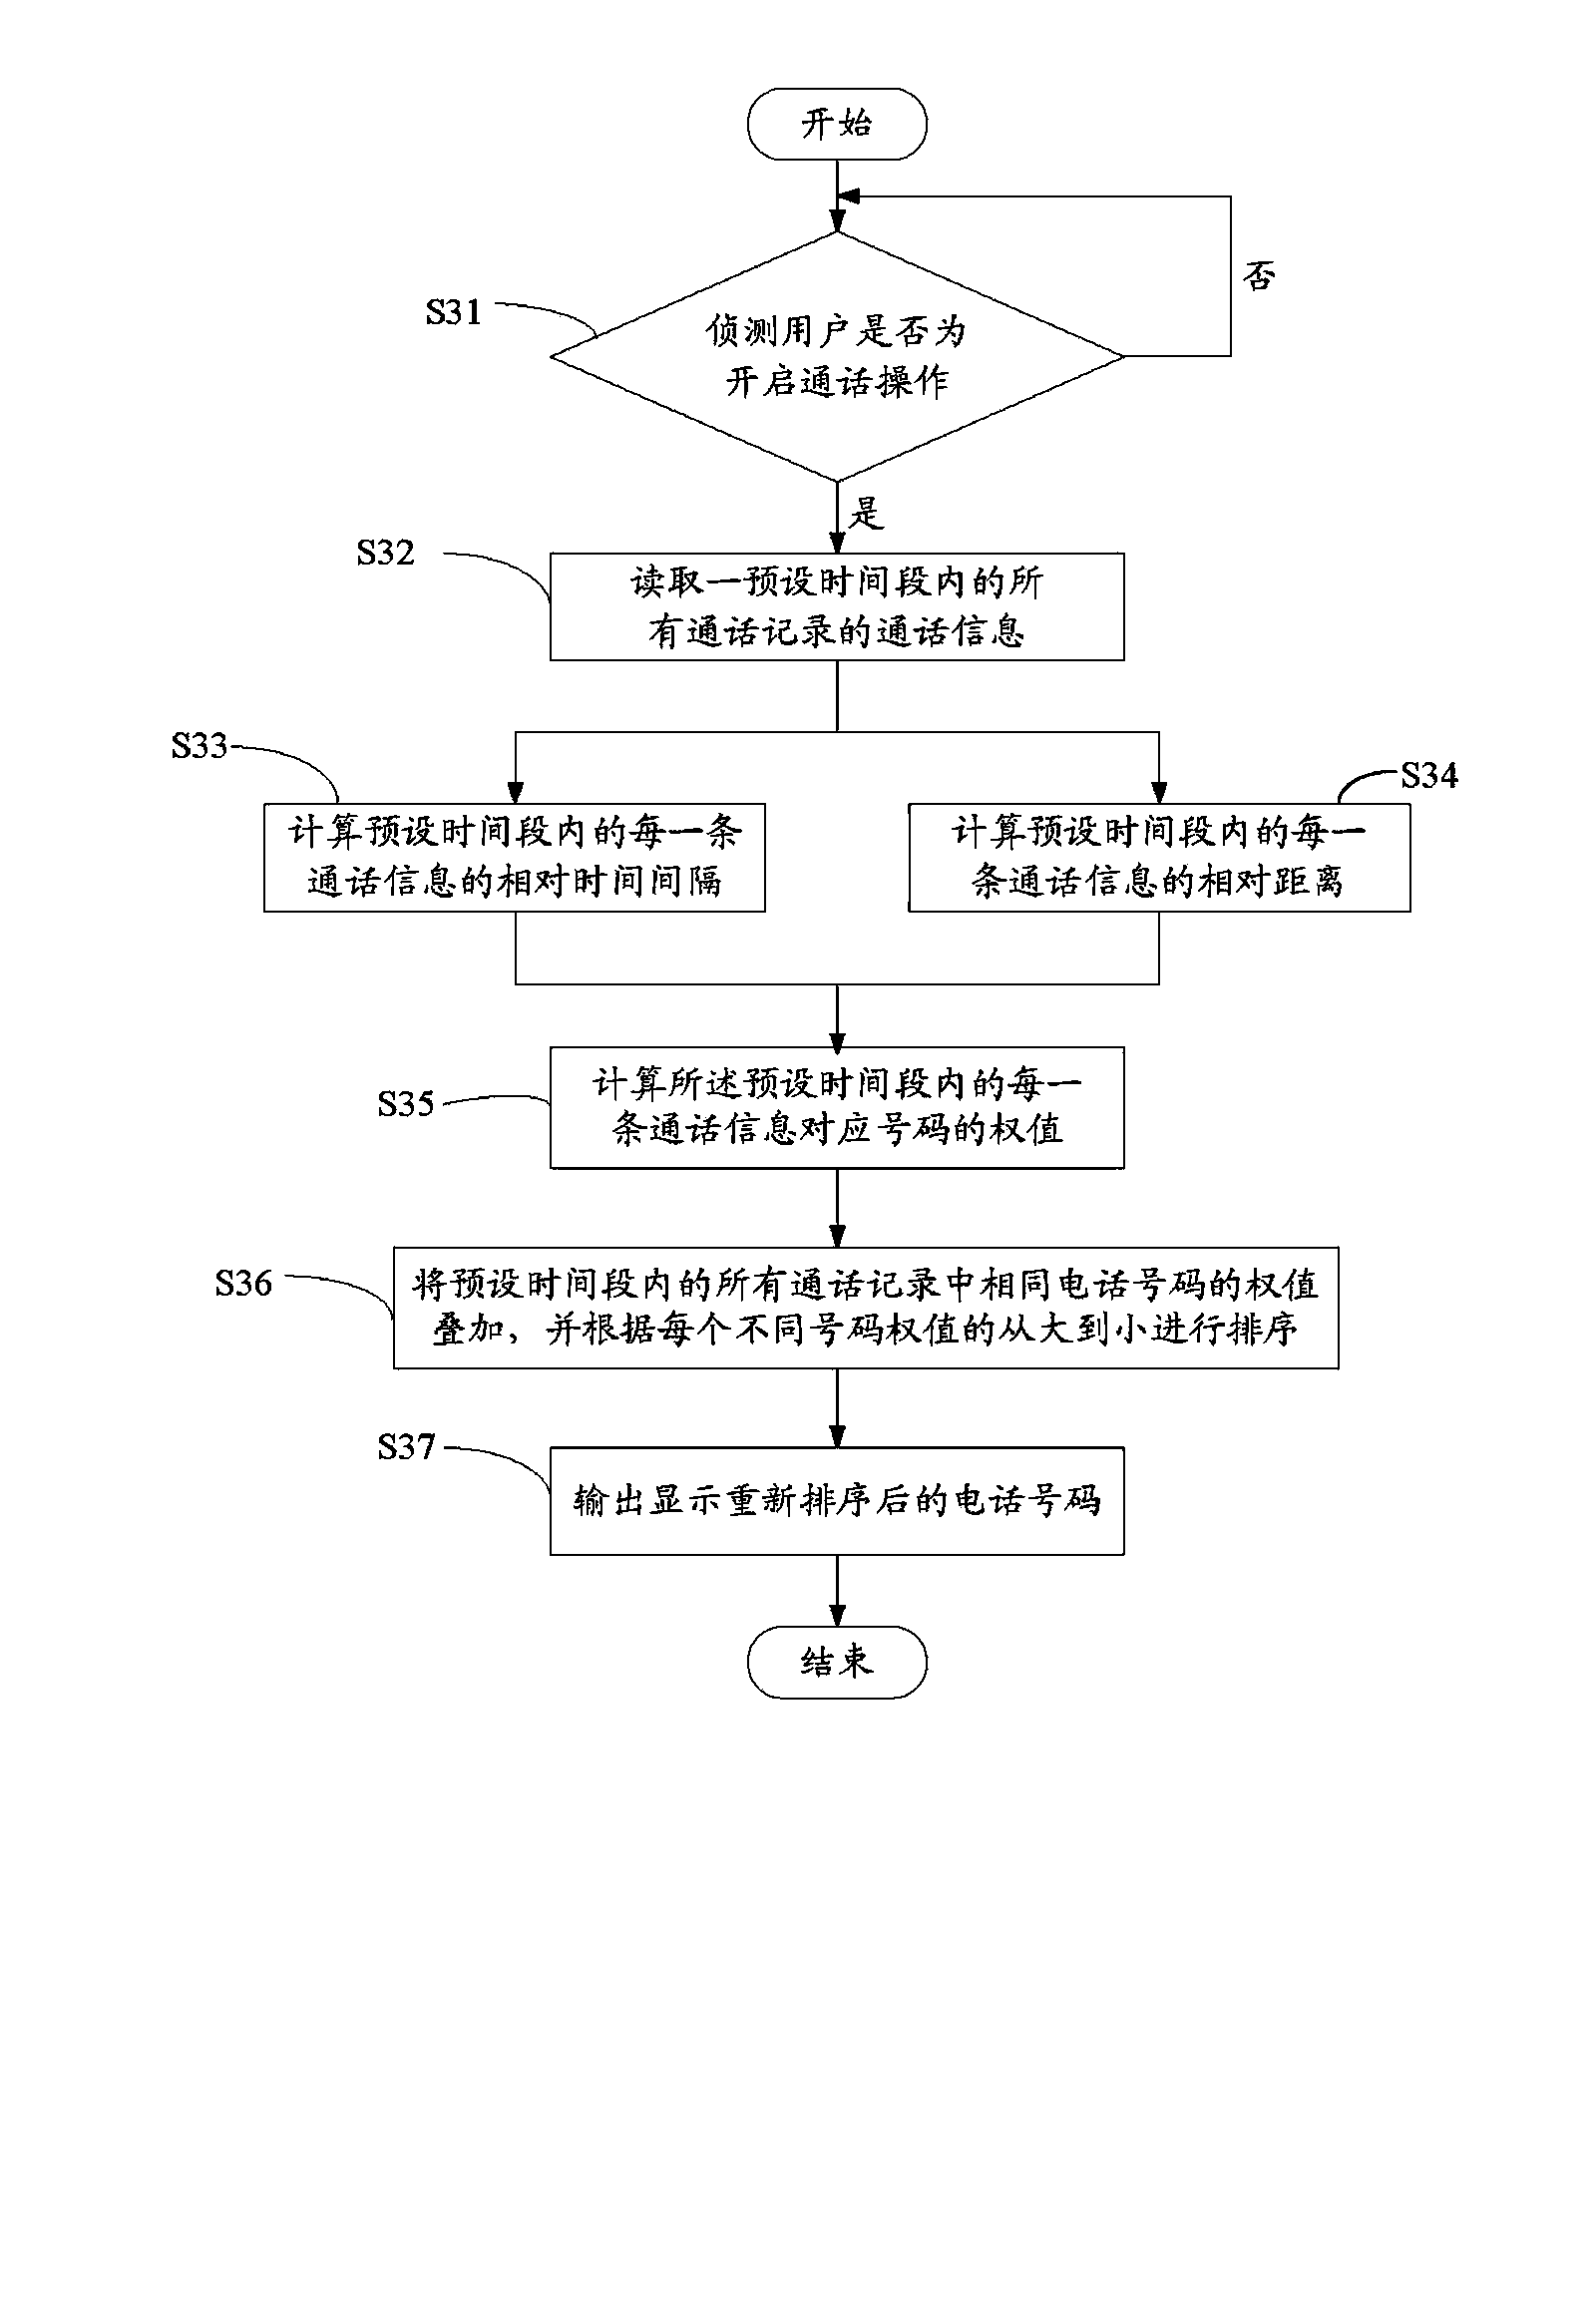 Electronic device with telephone number dynamic sorting function